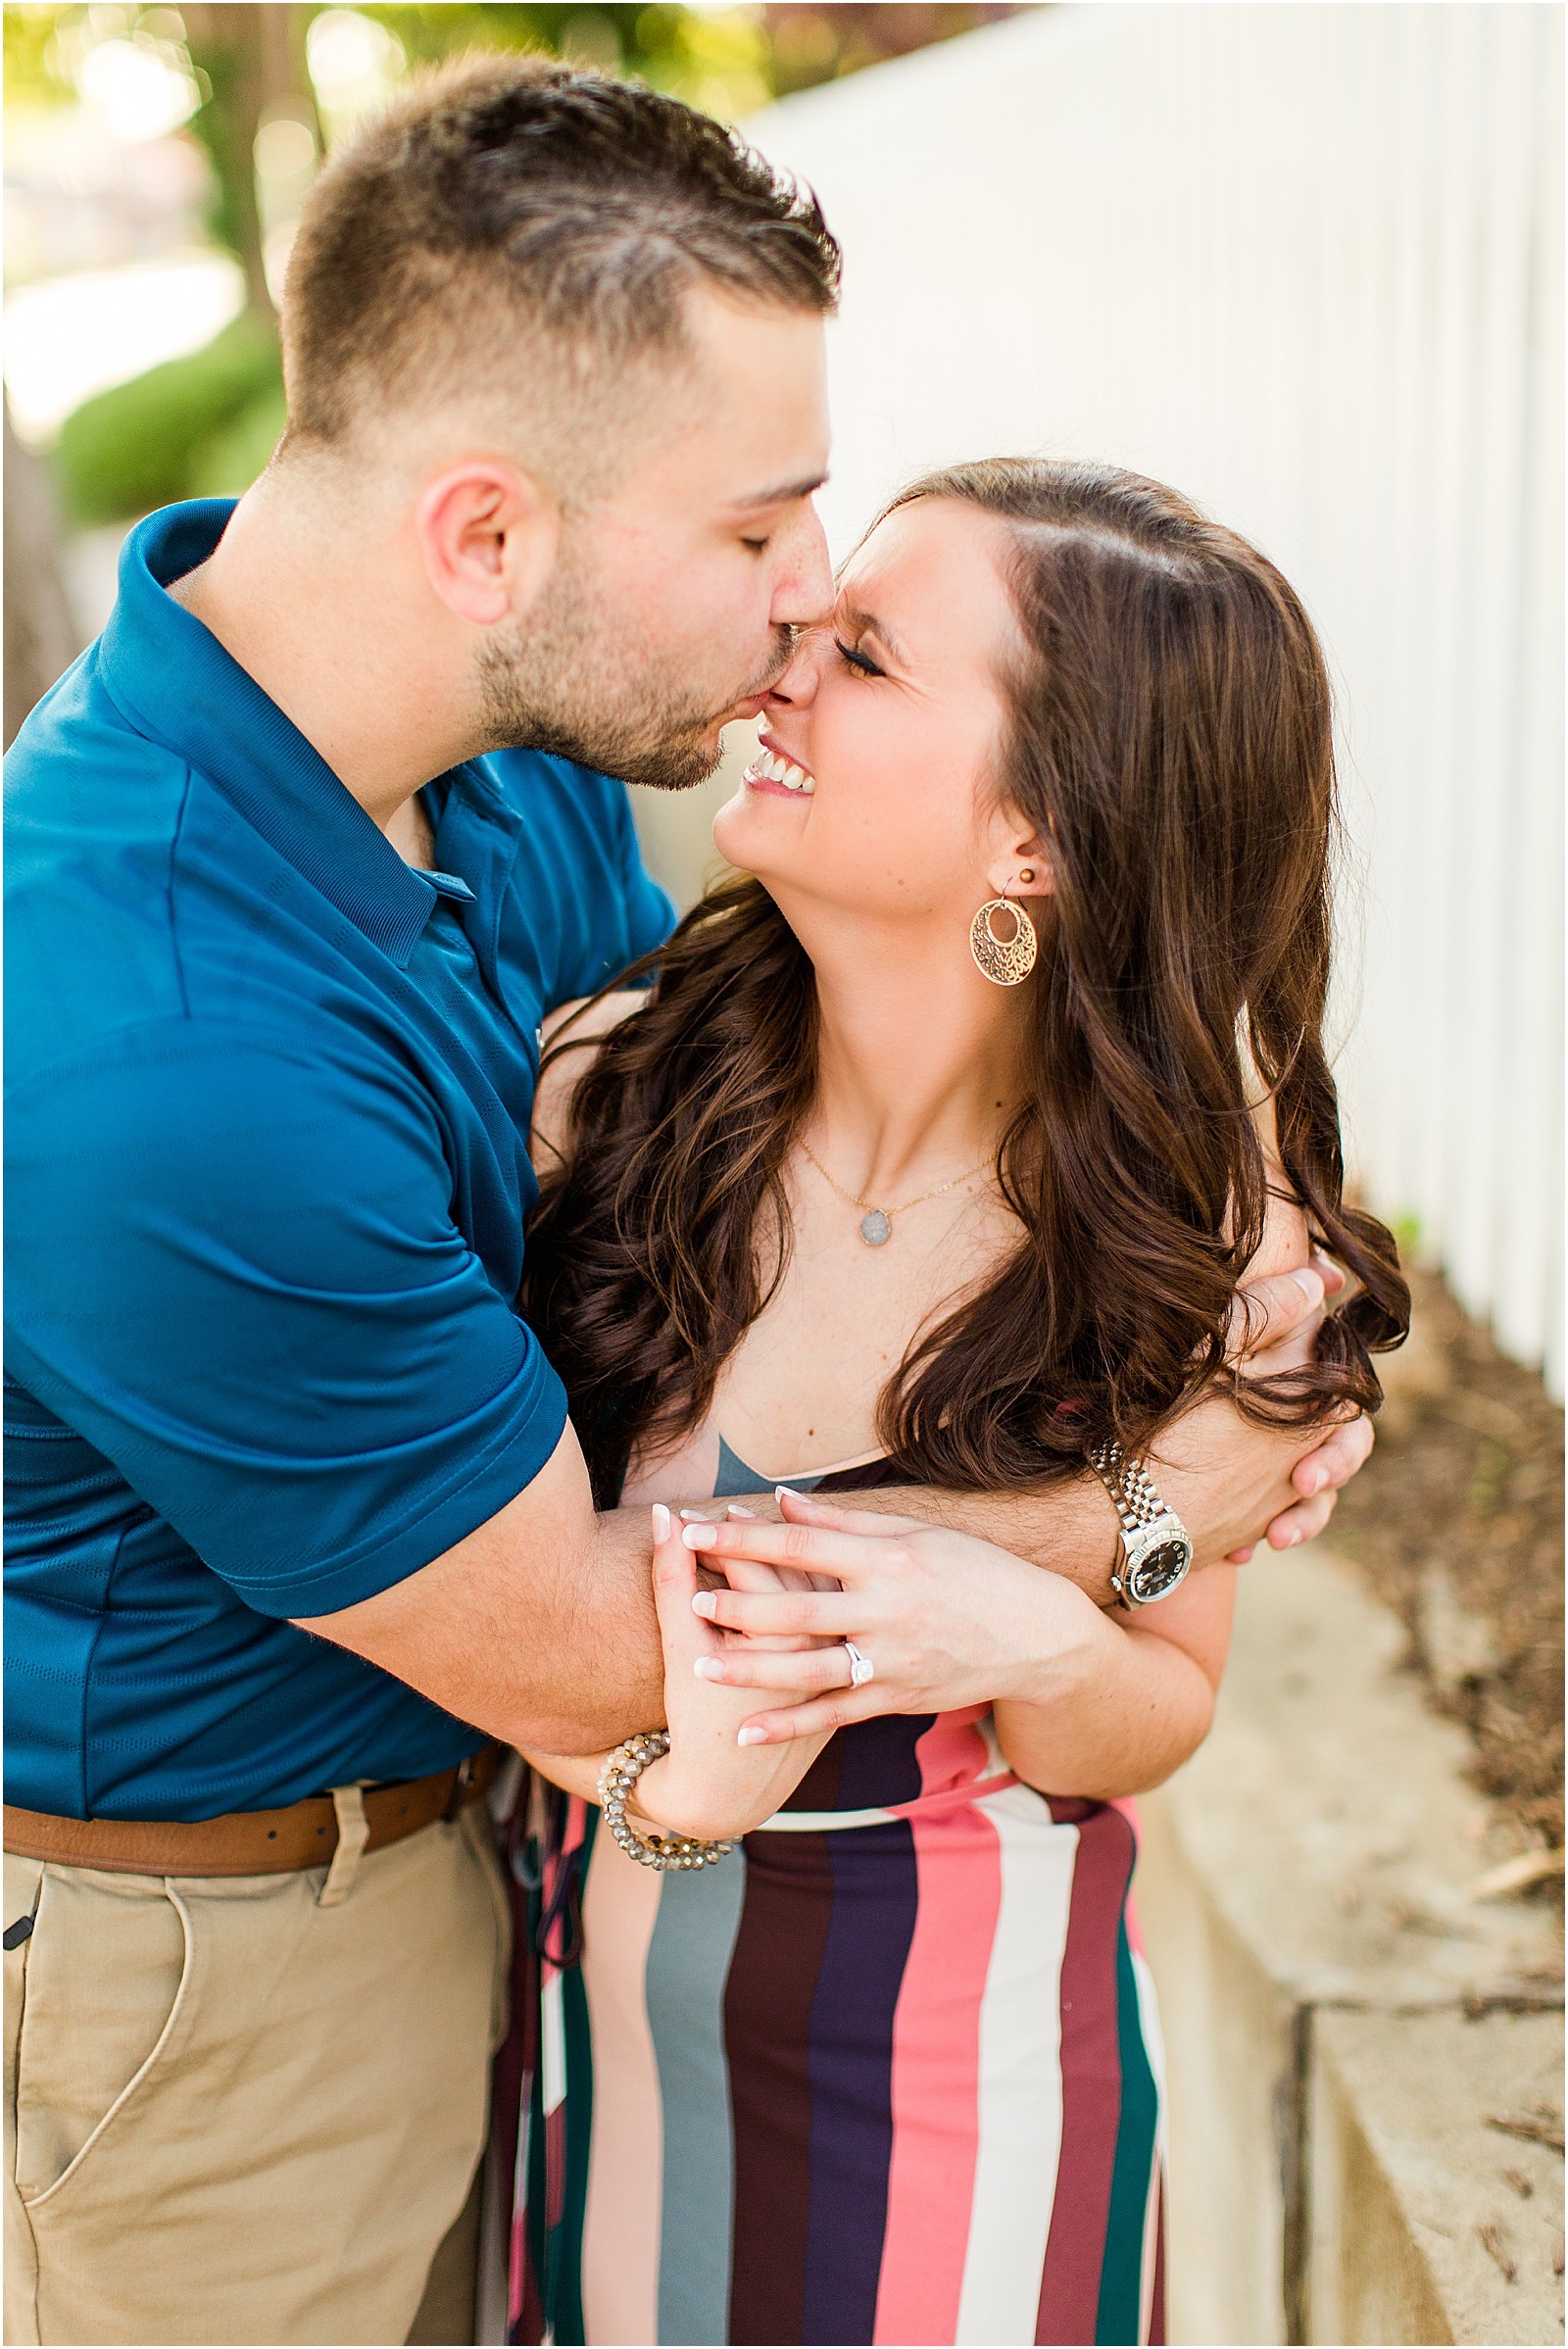 Downtown Newburgh Engagement Session | Matt and Blaire | Bret and Brandie Photography015.jpg